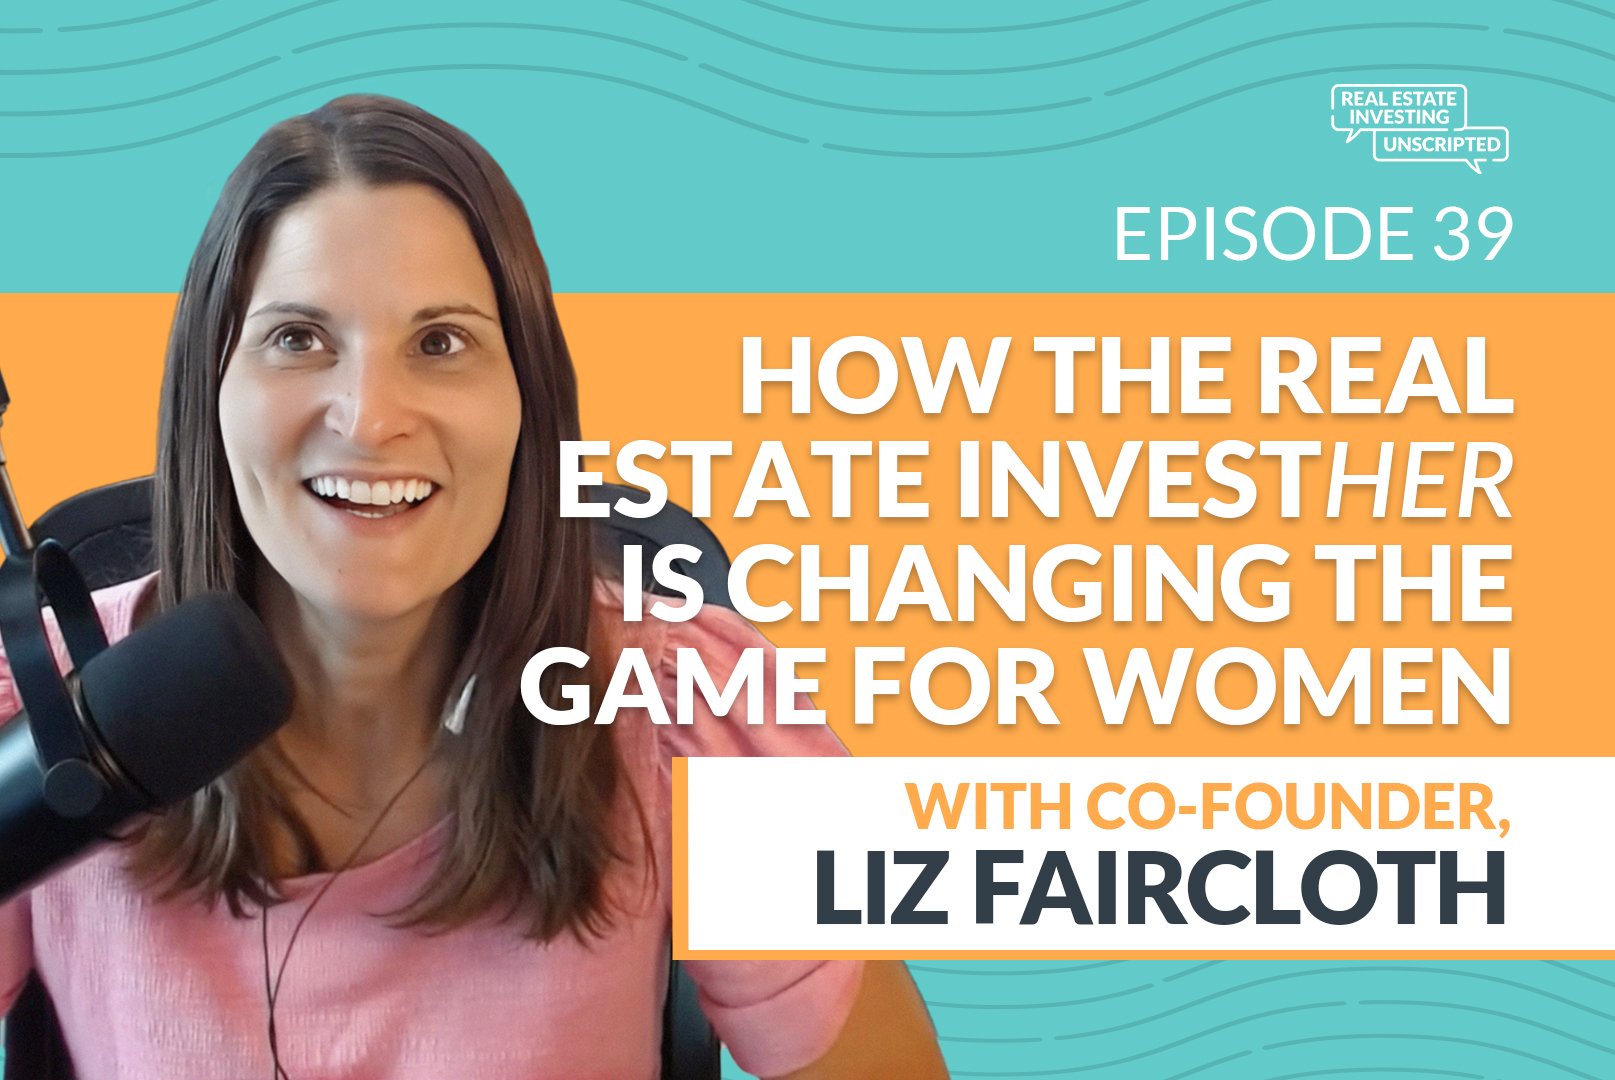 Real Estate Investing Unscripted: learn more about Liz Faircloth, co-founder of The Real Estate InvestHER® community